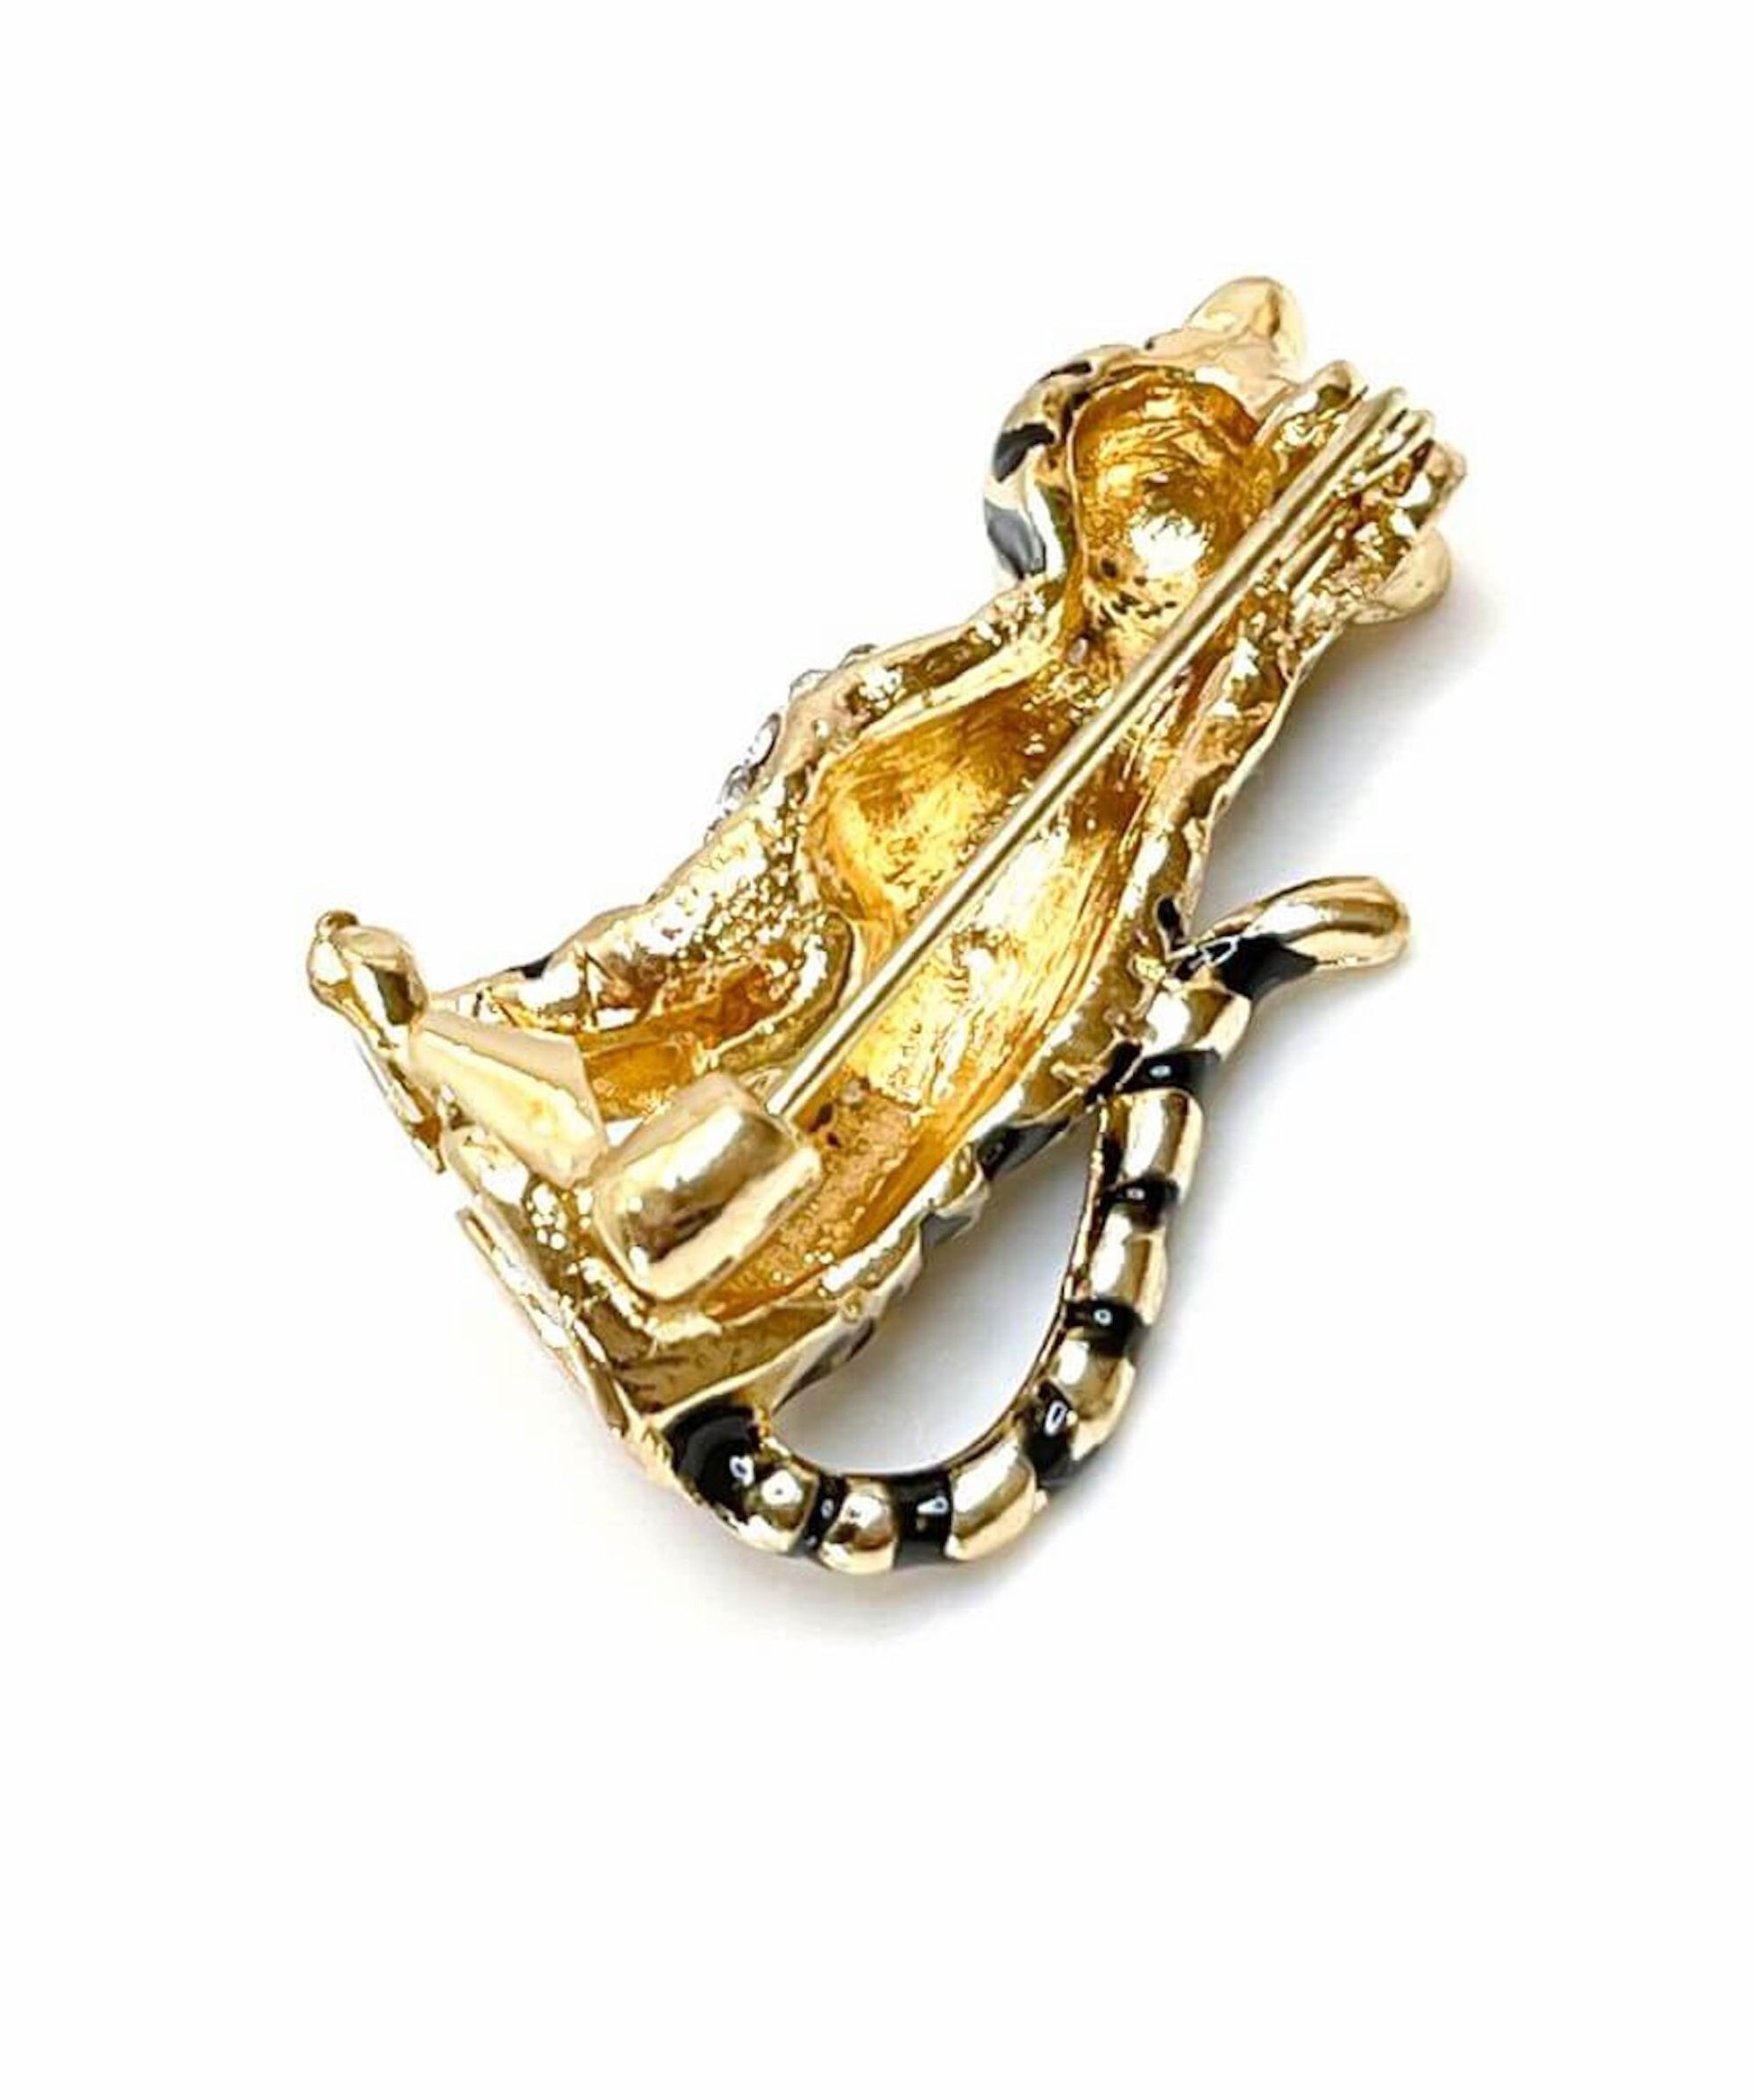 Gold Sitting Tiger Brooch, Gift for Animal Lovers, Tiger with Black Strips Jewelry, Brooches For Women